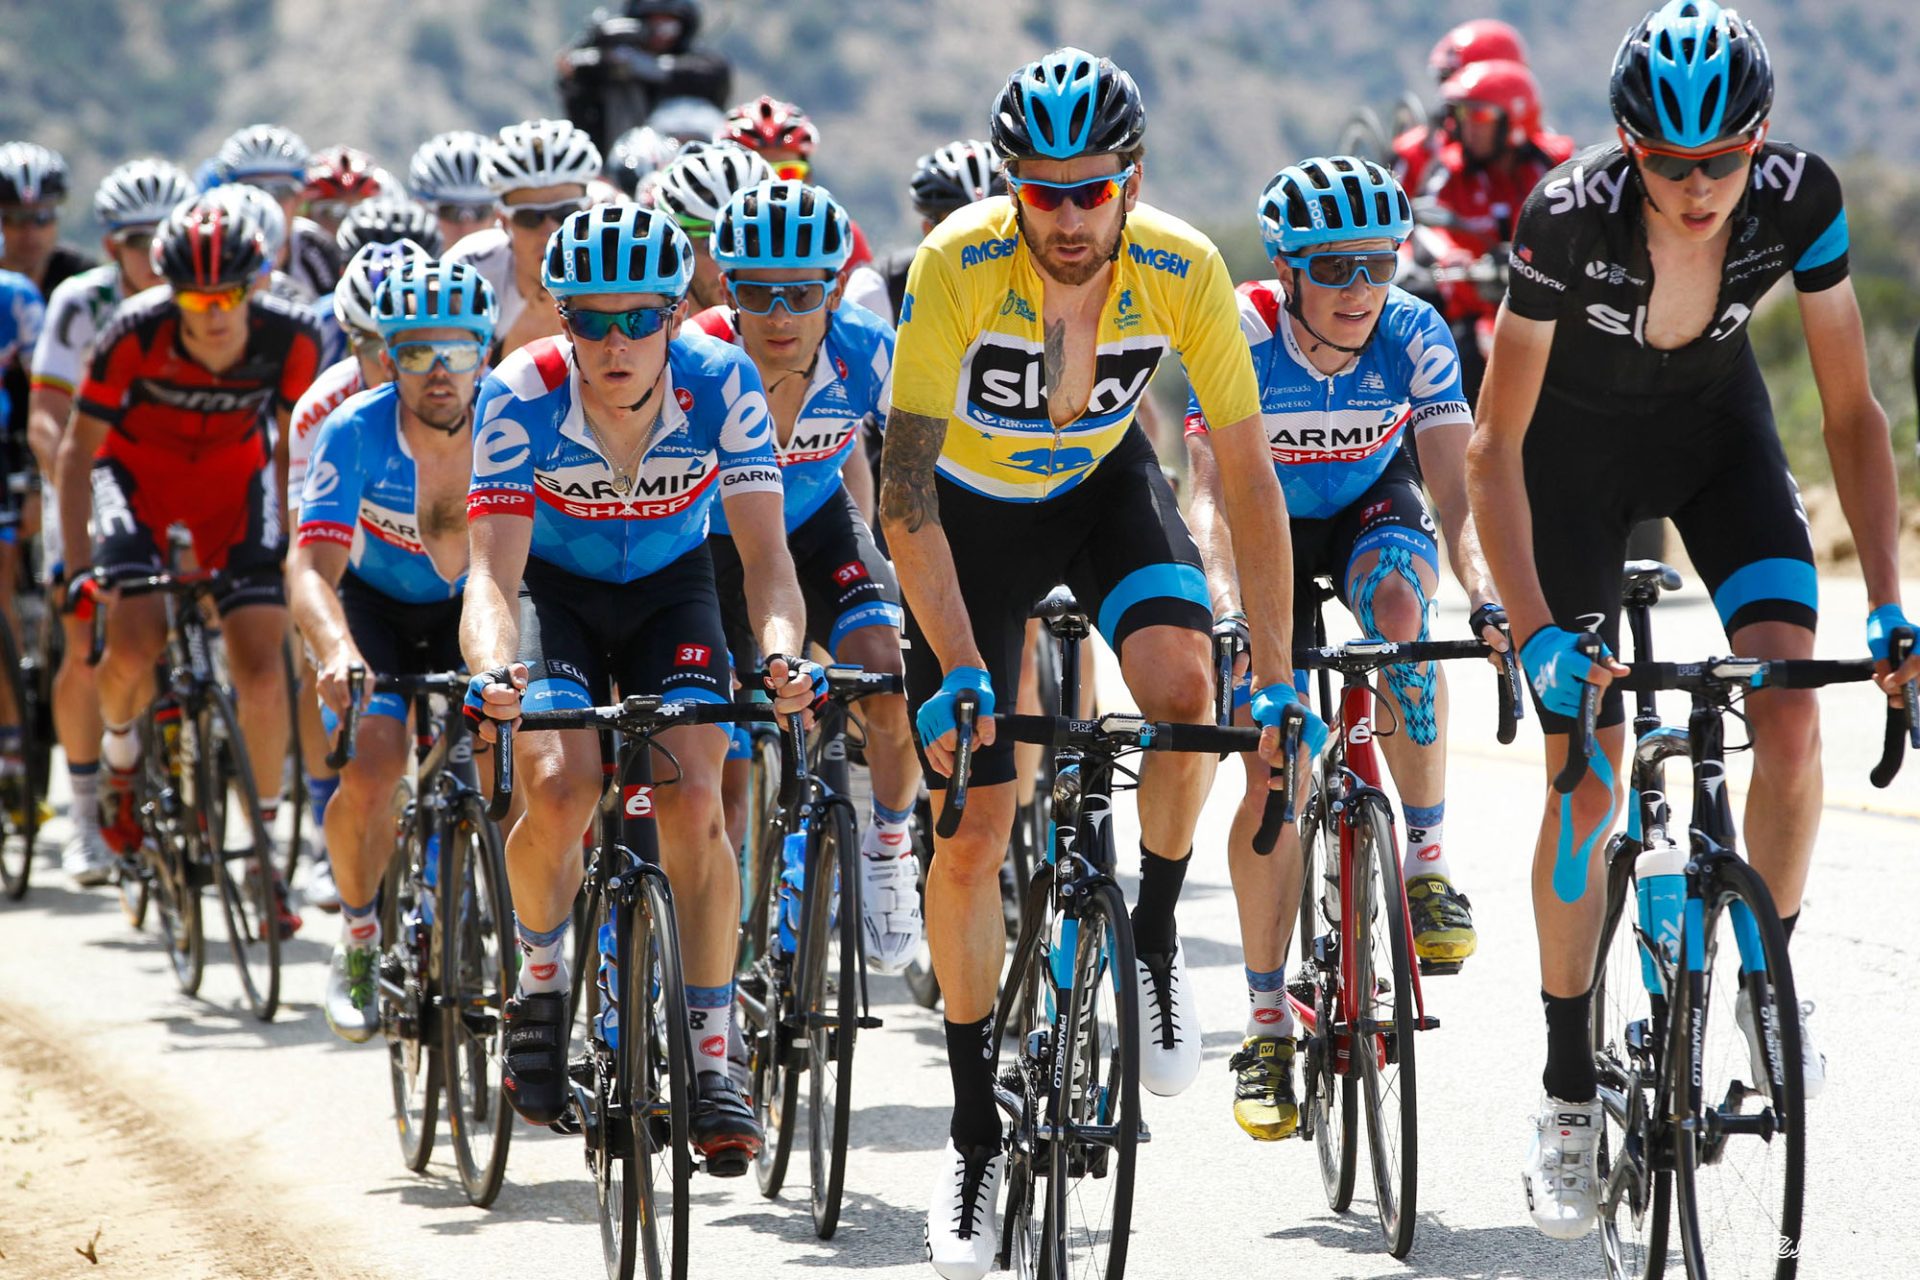 Joe Dombrowski leads a line of riders at the 2014 Tour of California. Yellow jersey and teammate Bradley Wiggings is next to/slightly behind him, with a pack of blue-jerseyed Garmin riders tucked in right behind.